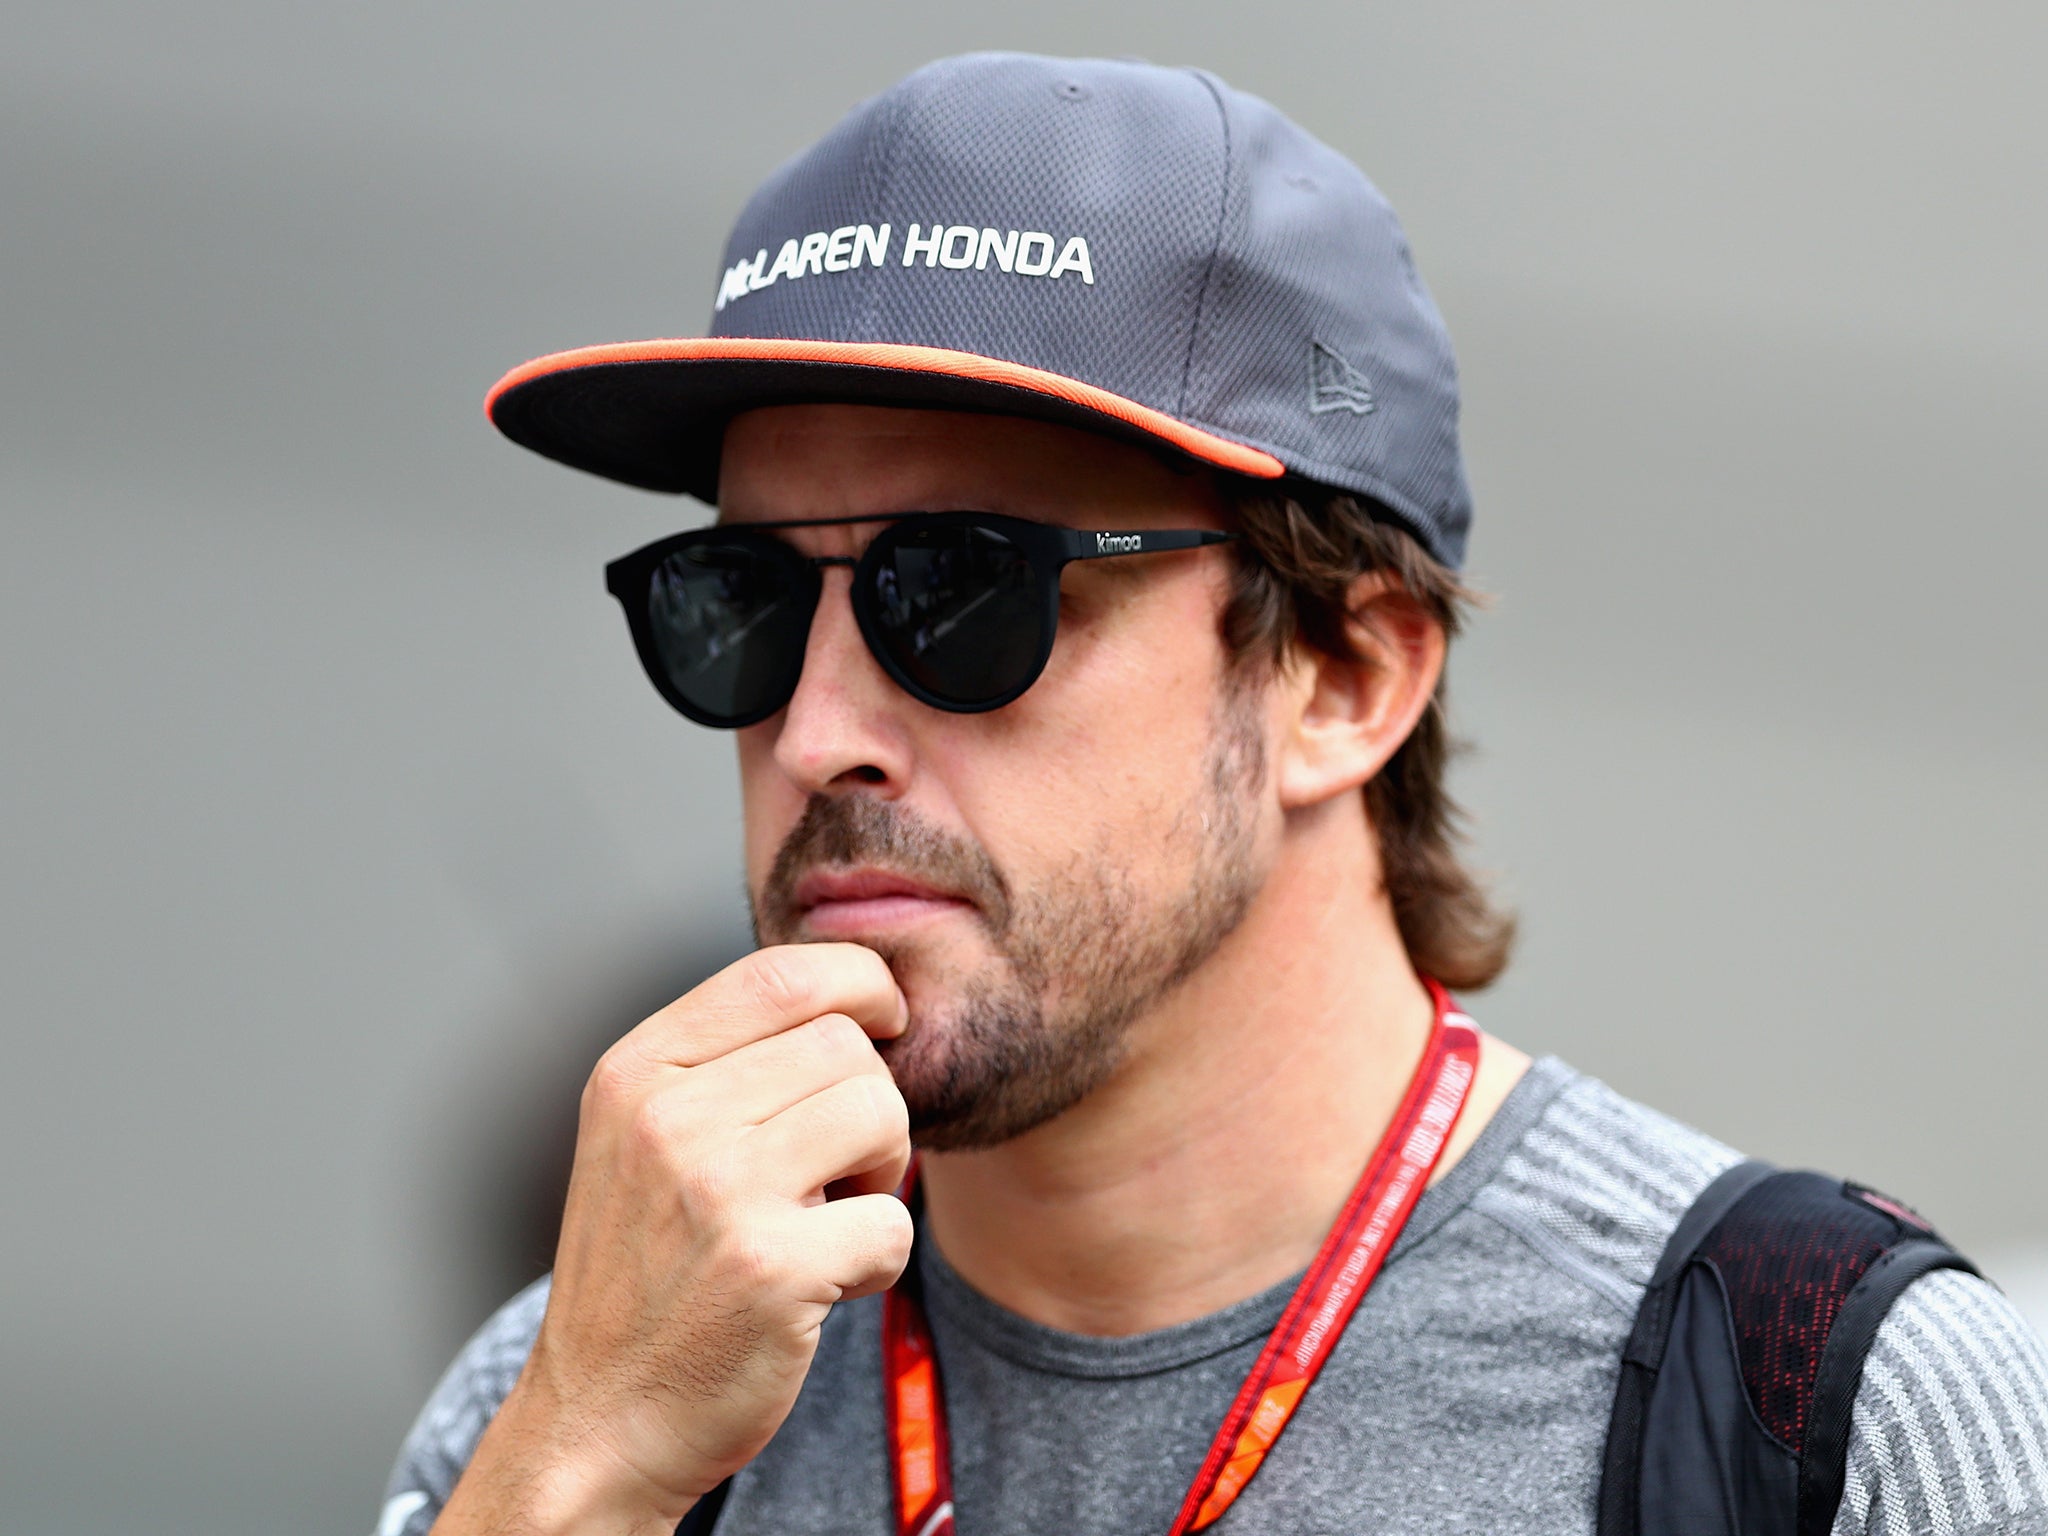 Fernando Alonso has signed a new contract with McLaren for 2018